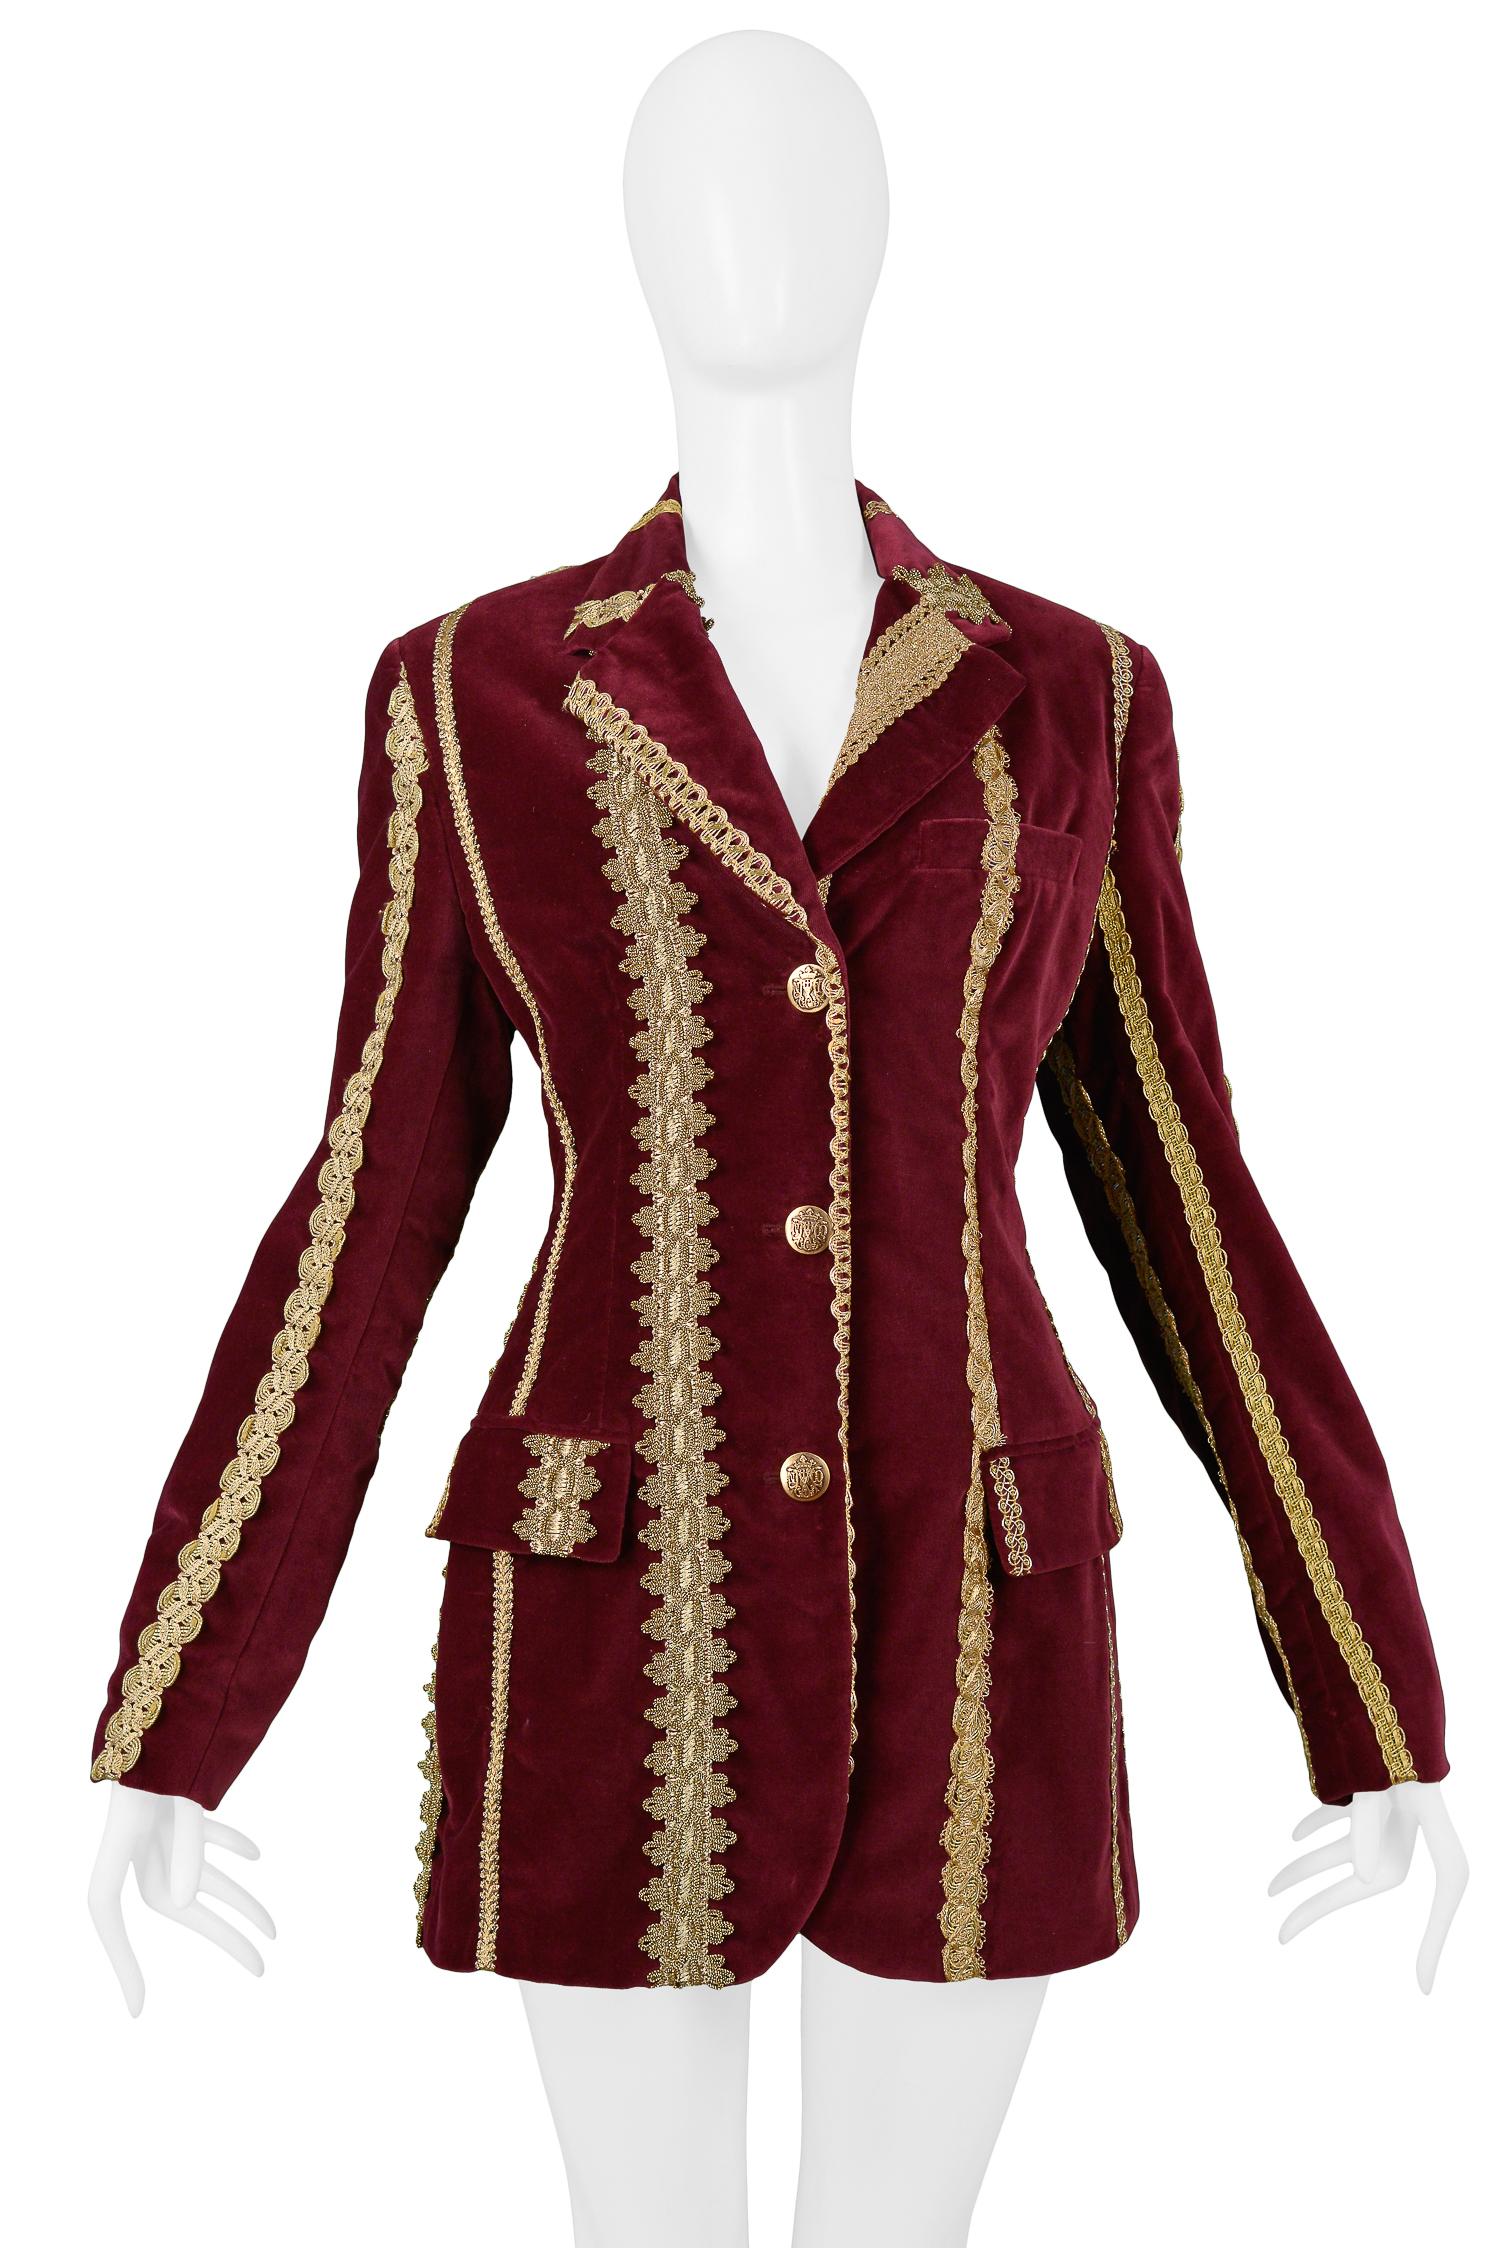 Vintage Dolce & Gabbana burgundy velvet jacket with gold buttons, trim, and piping. Collection AW 1993.

Deadstock.

Size IT 44